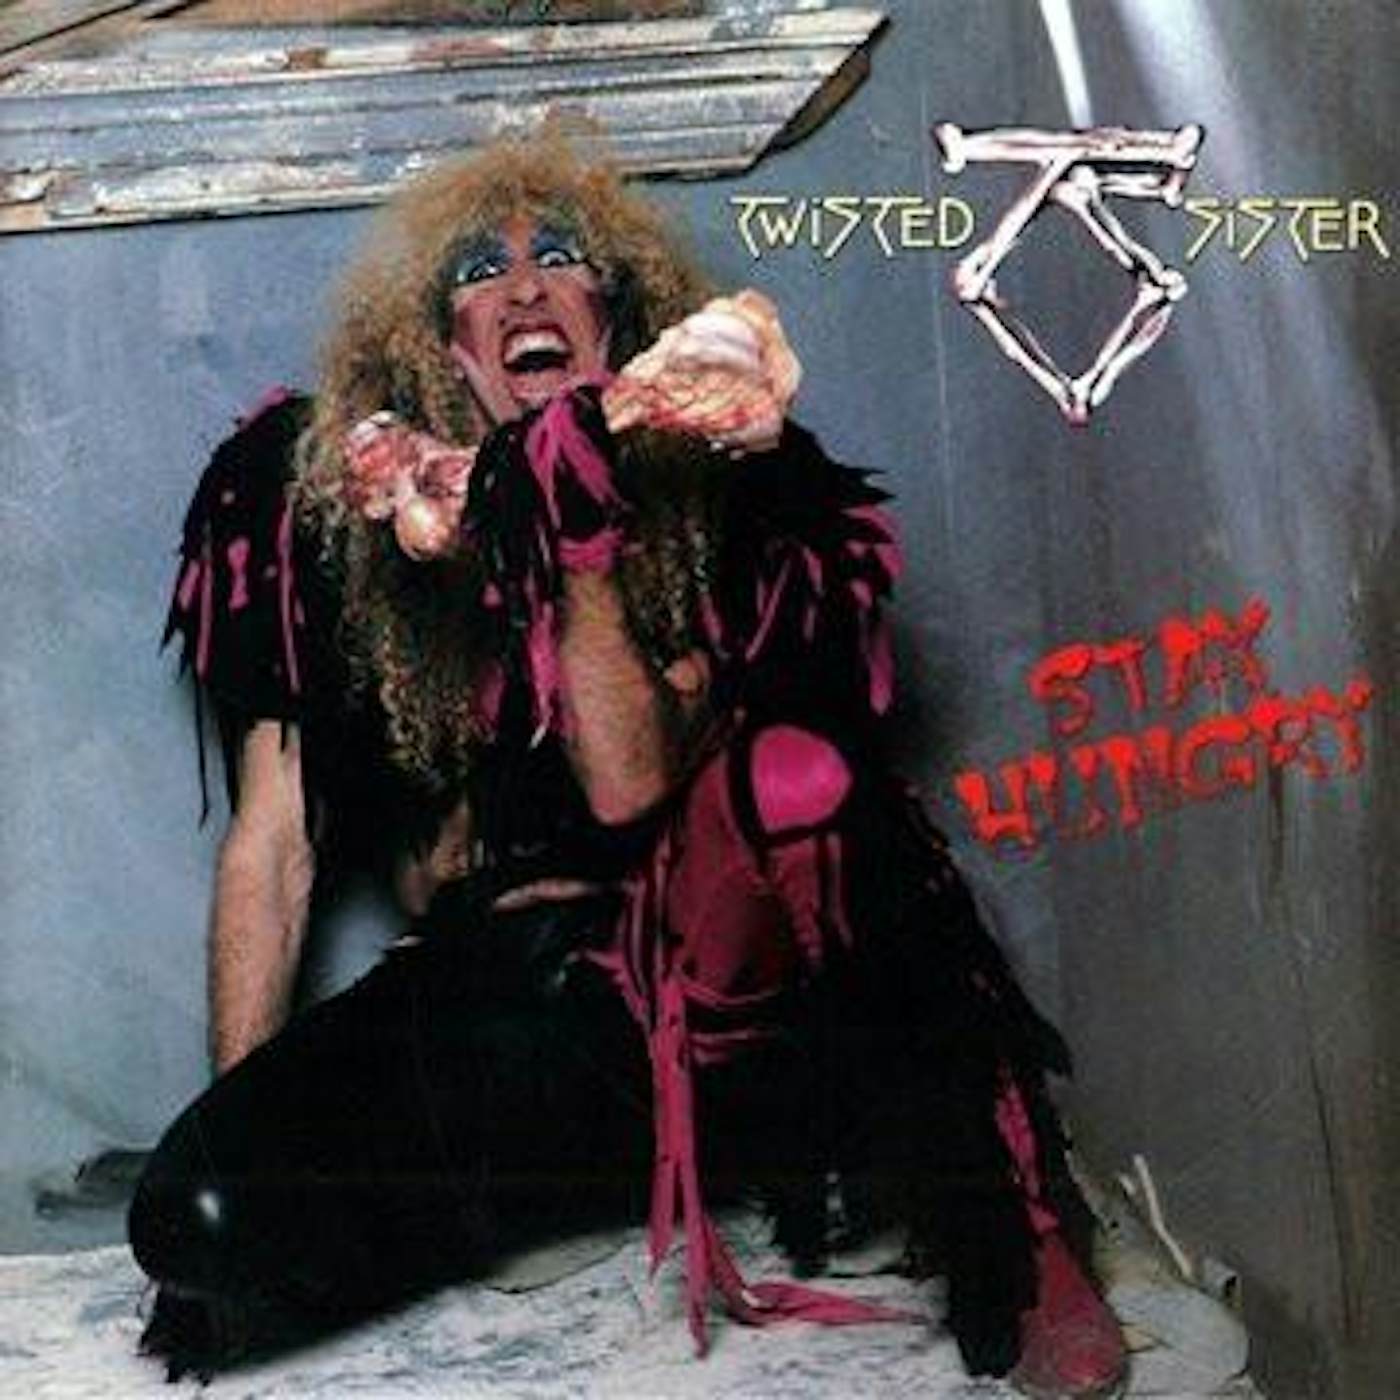 Twisted Sister STAY HUNGRY CD